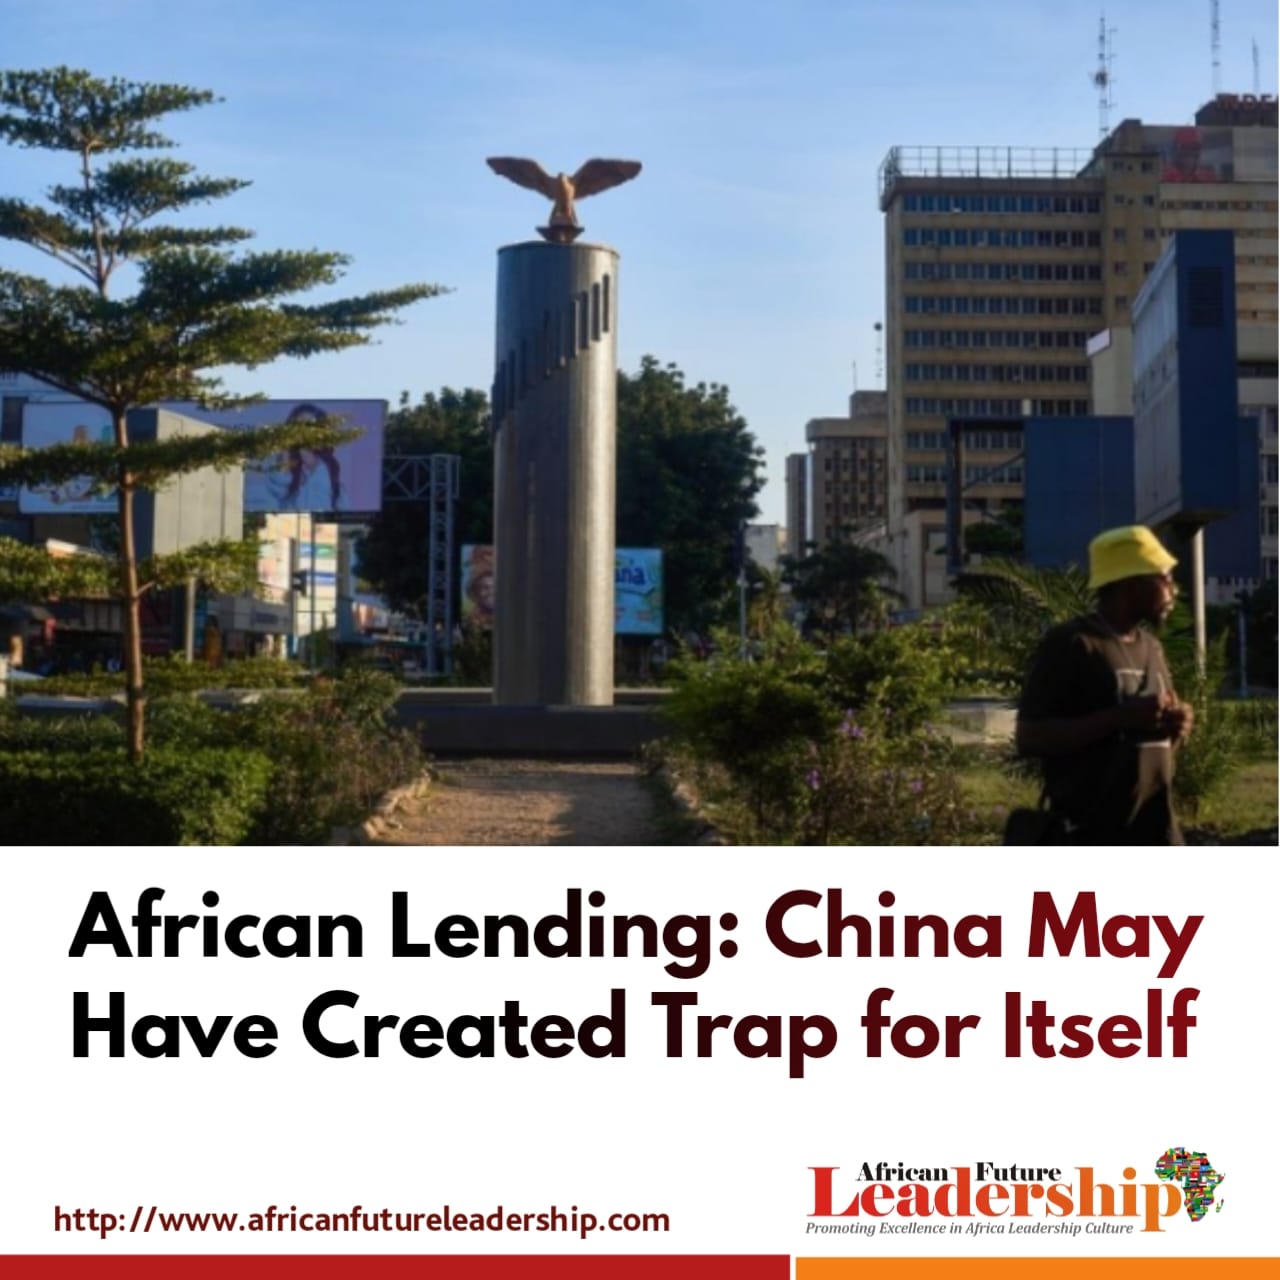 African Lending: China May Have Created Trap for Itself